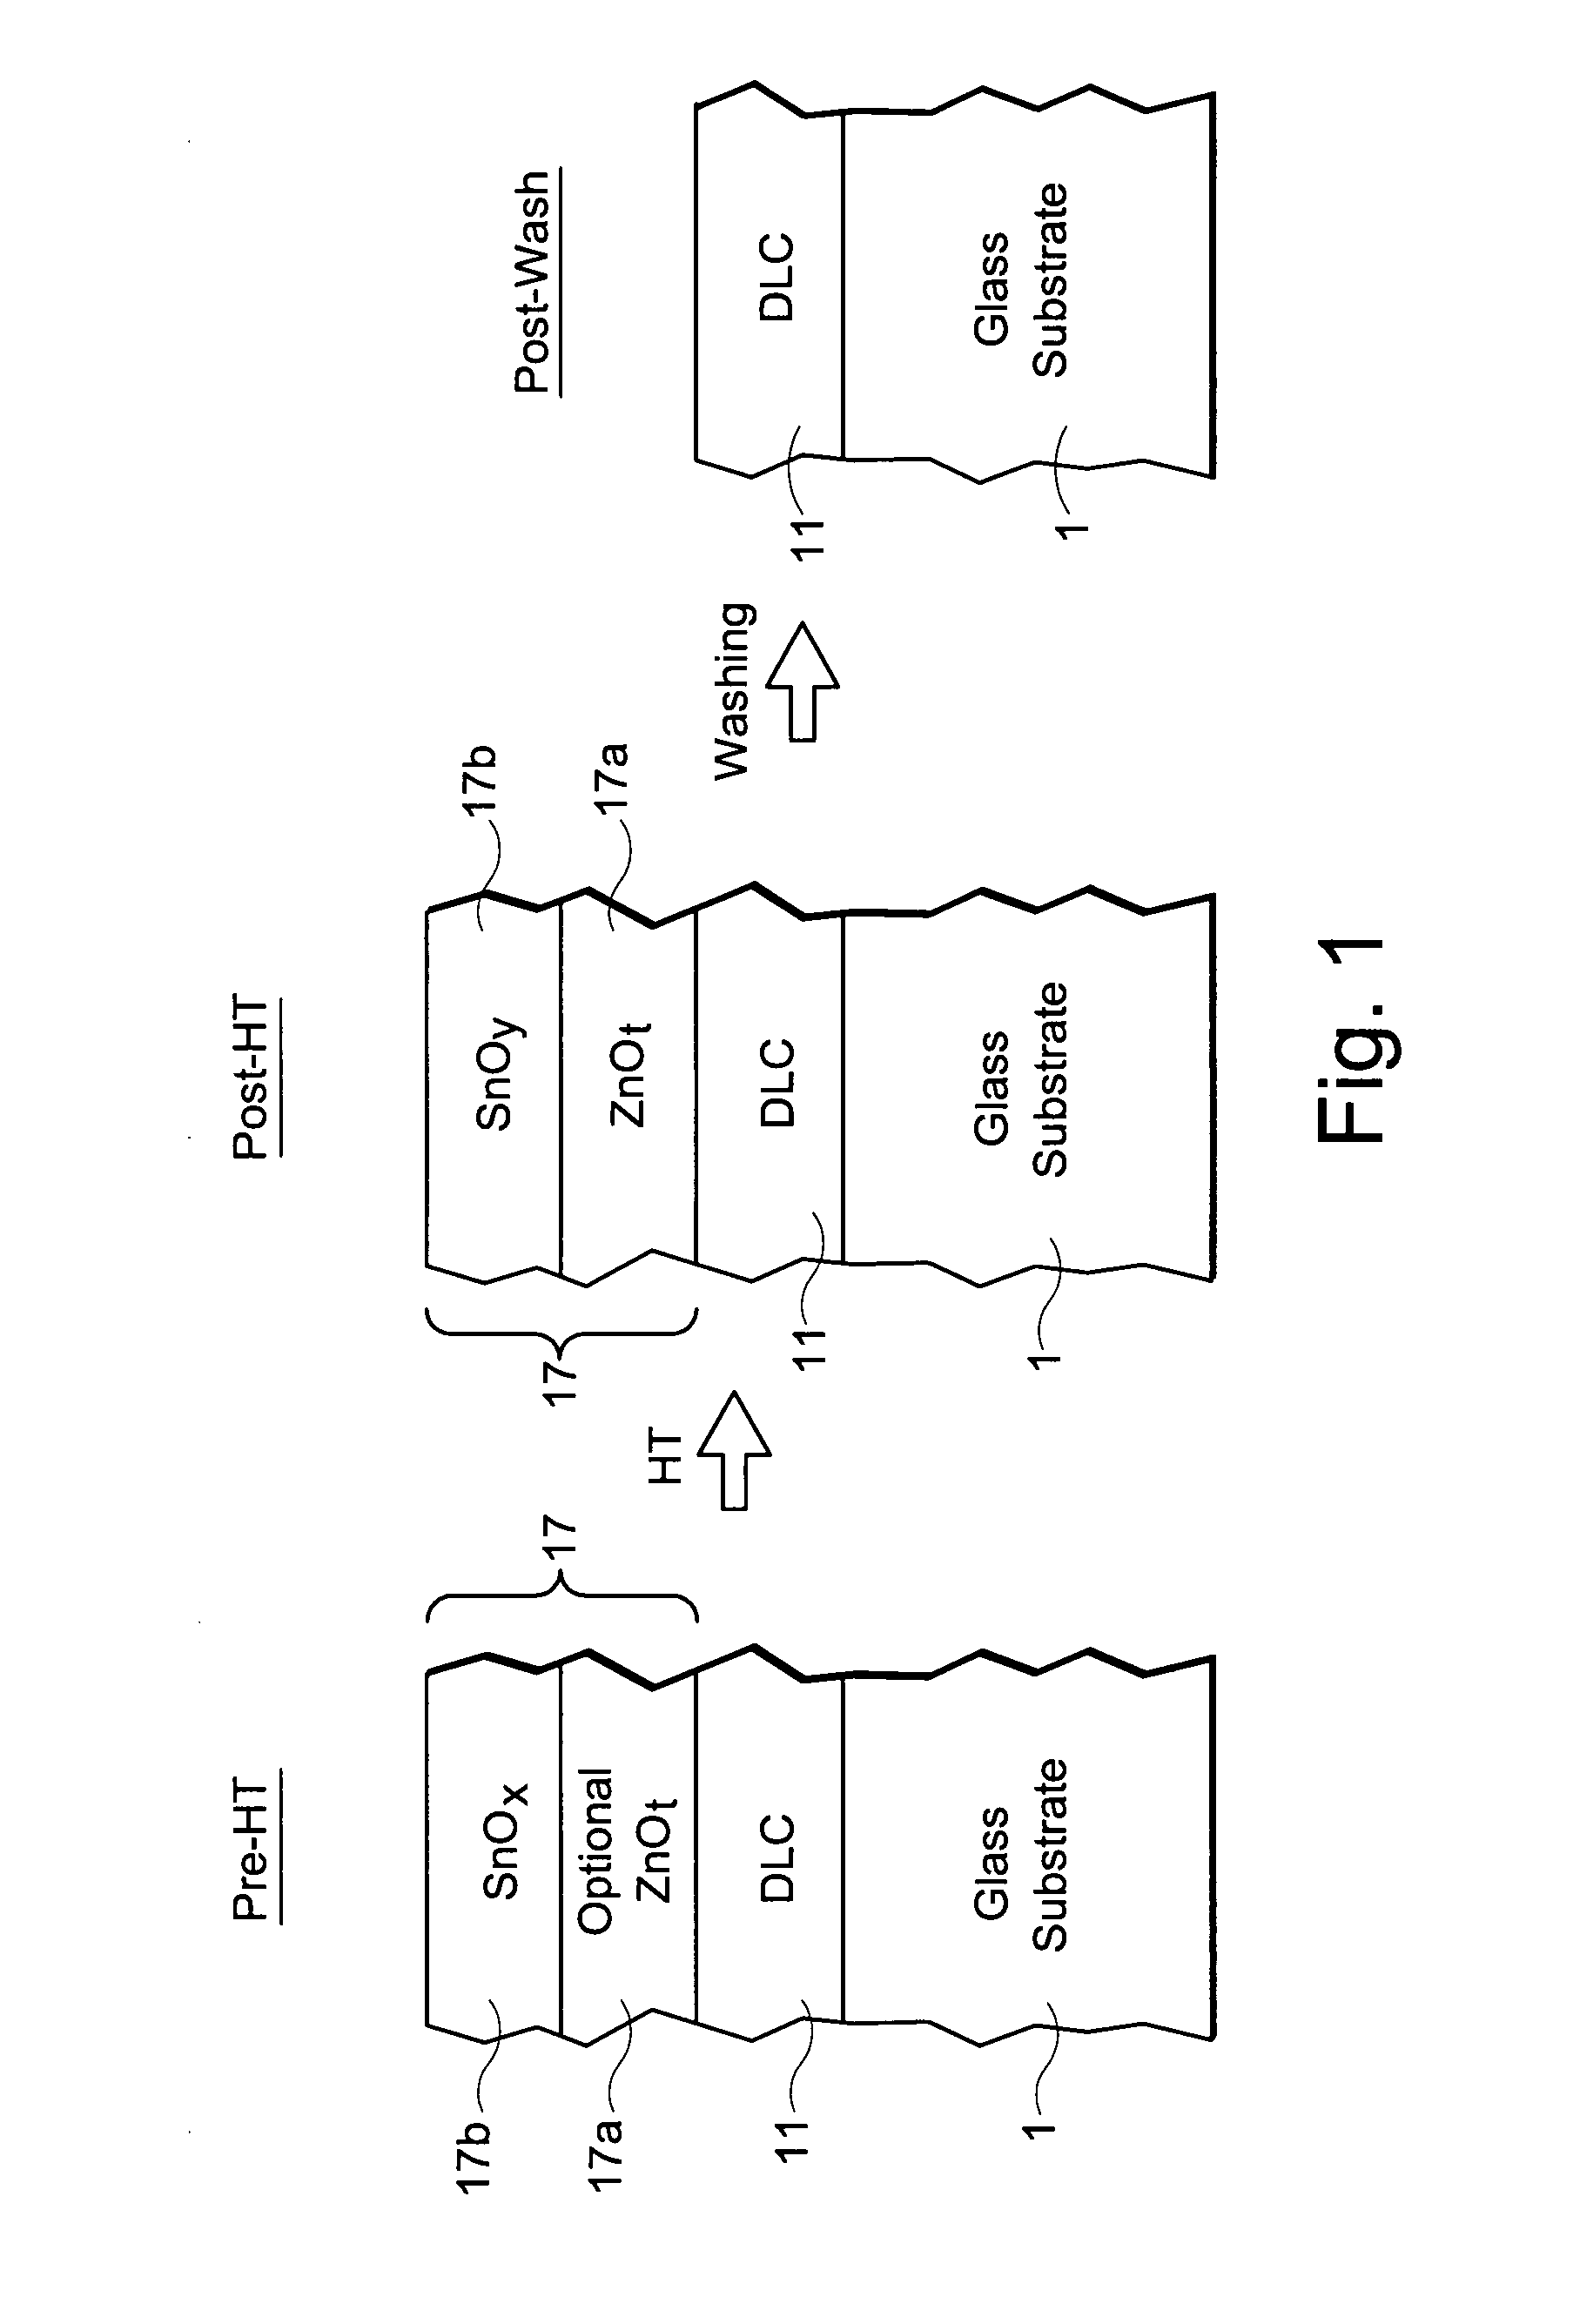 Method of making heat treated coated article using diamond-like carbon (DLC) coating and protective film with oxygen content of protective film based on bending characteristics of coated article